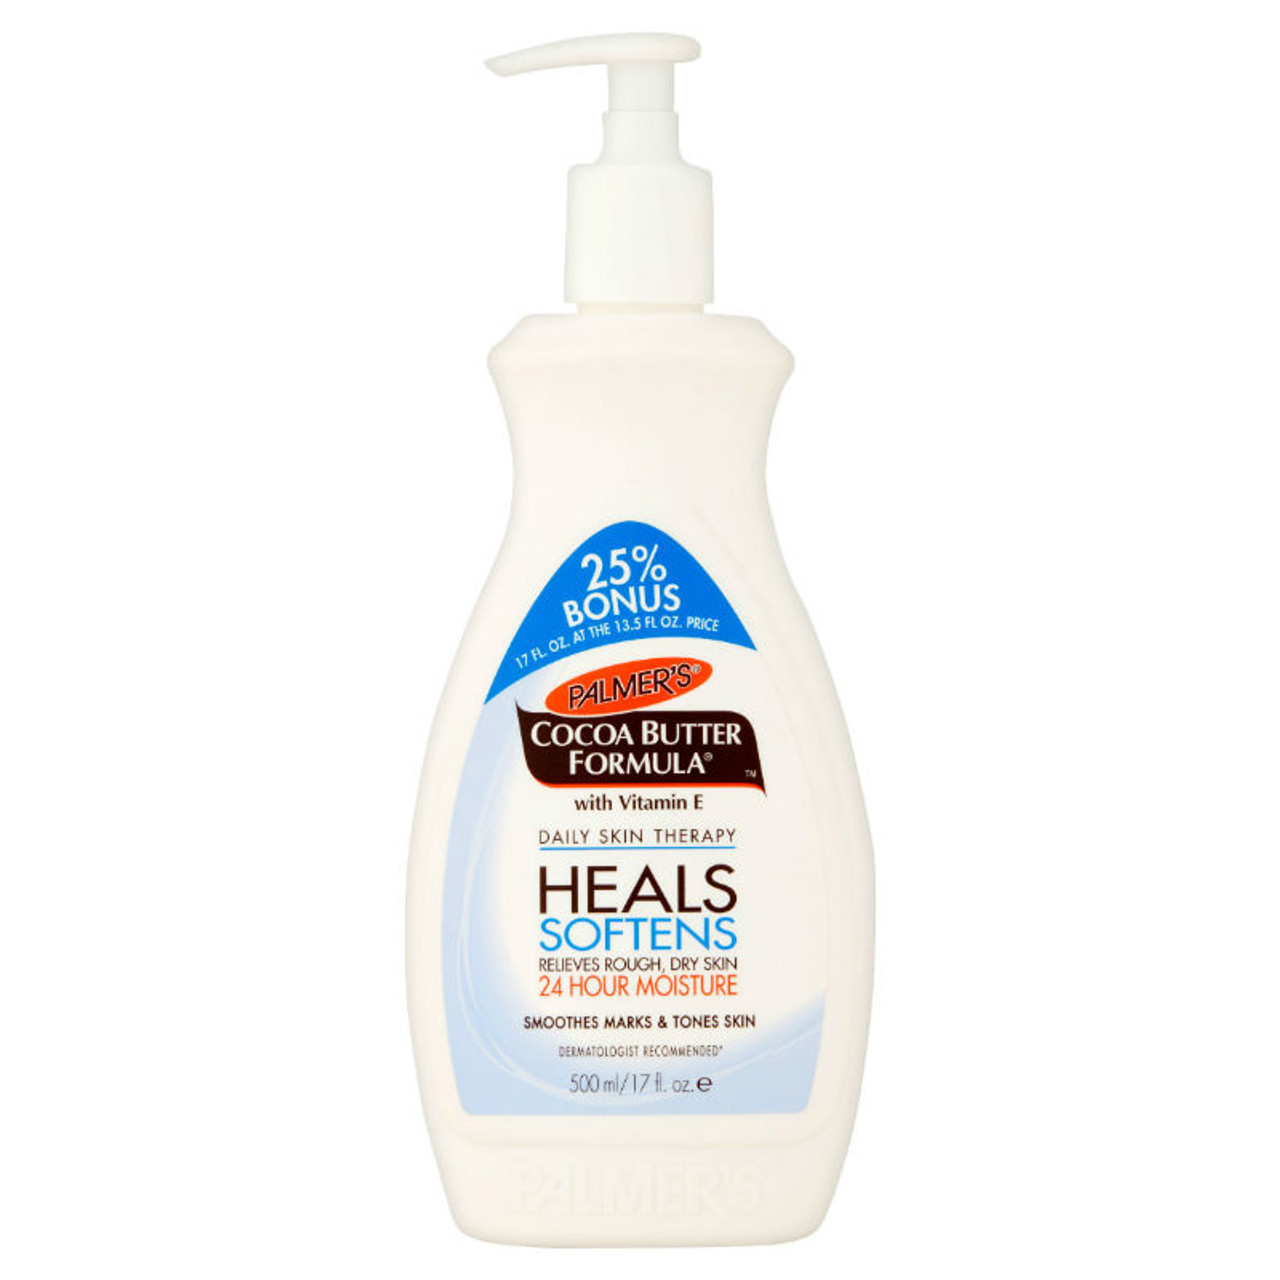 Palmer's Cocoa Butter Formula Skin Therapy Lotion (17 NaturallyCurly